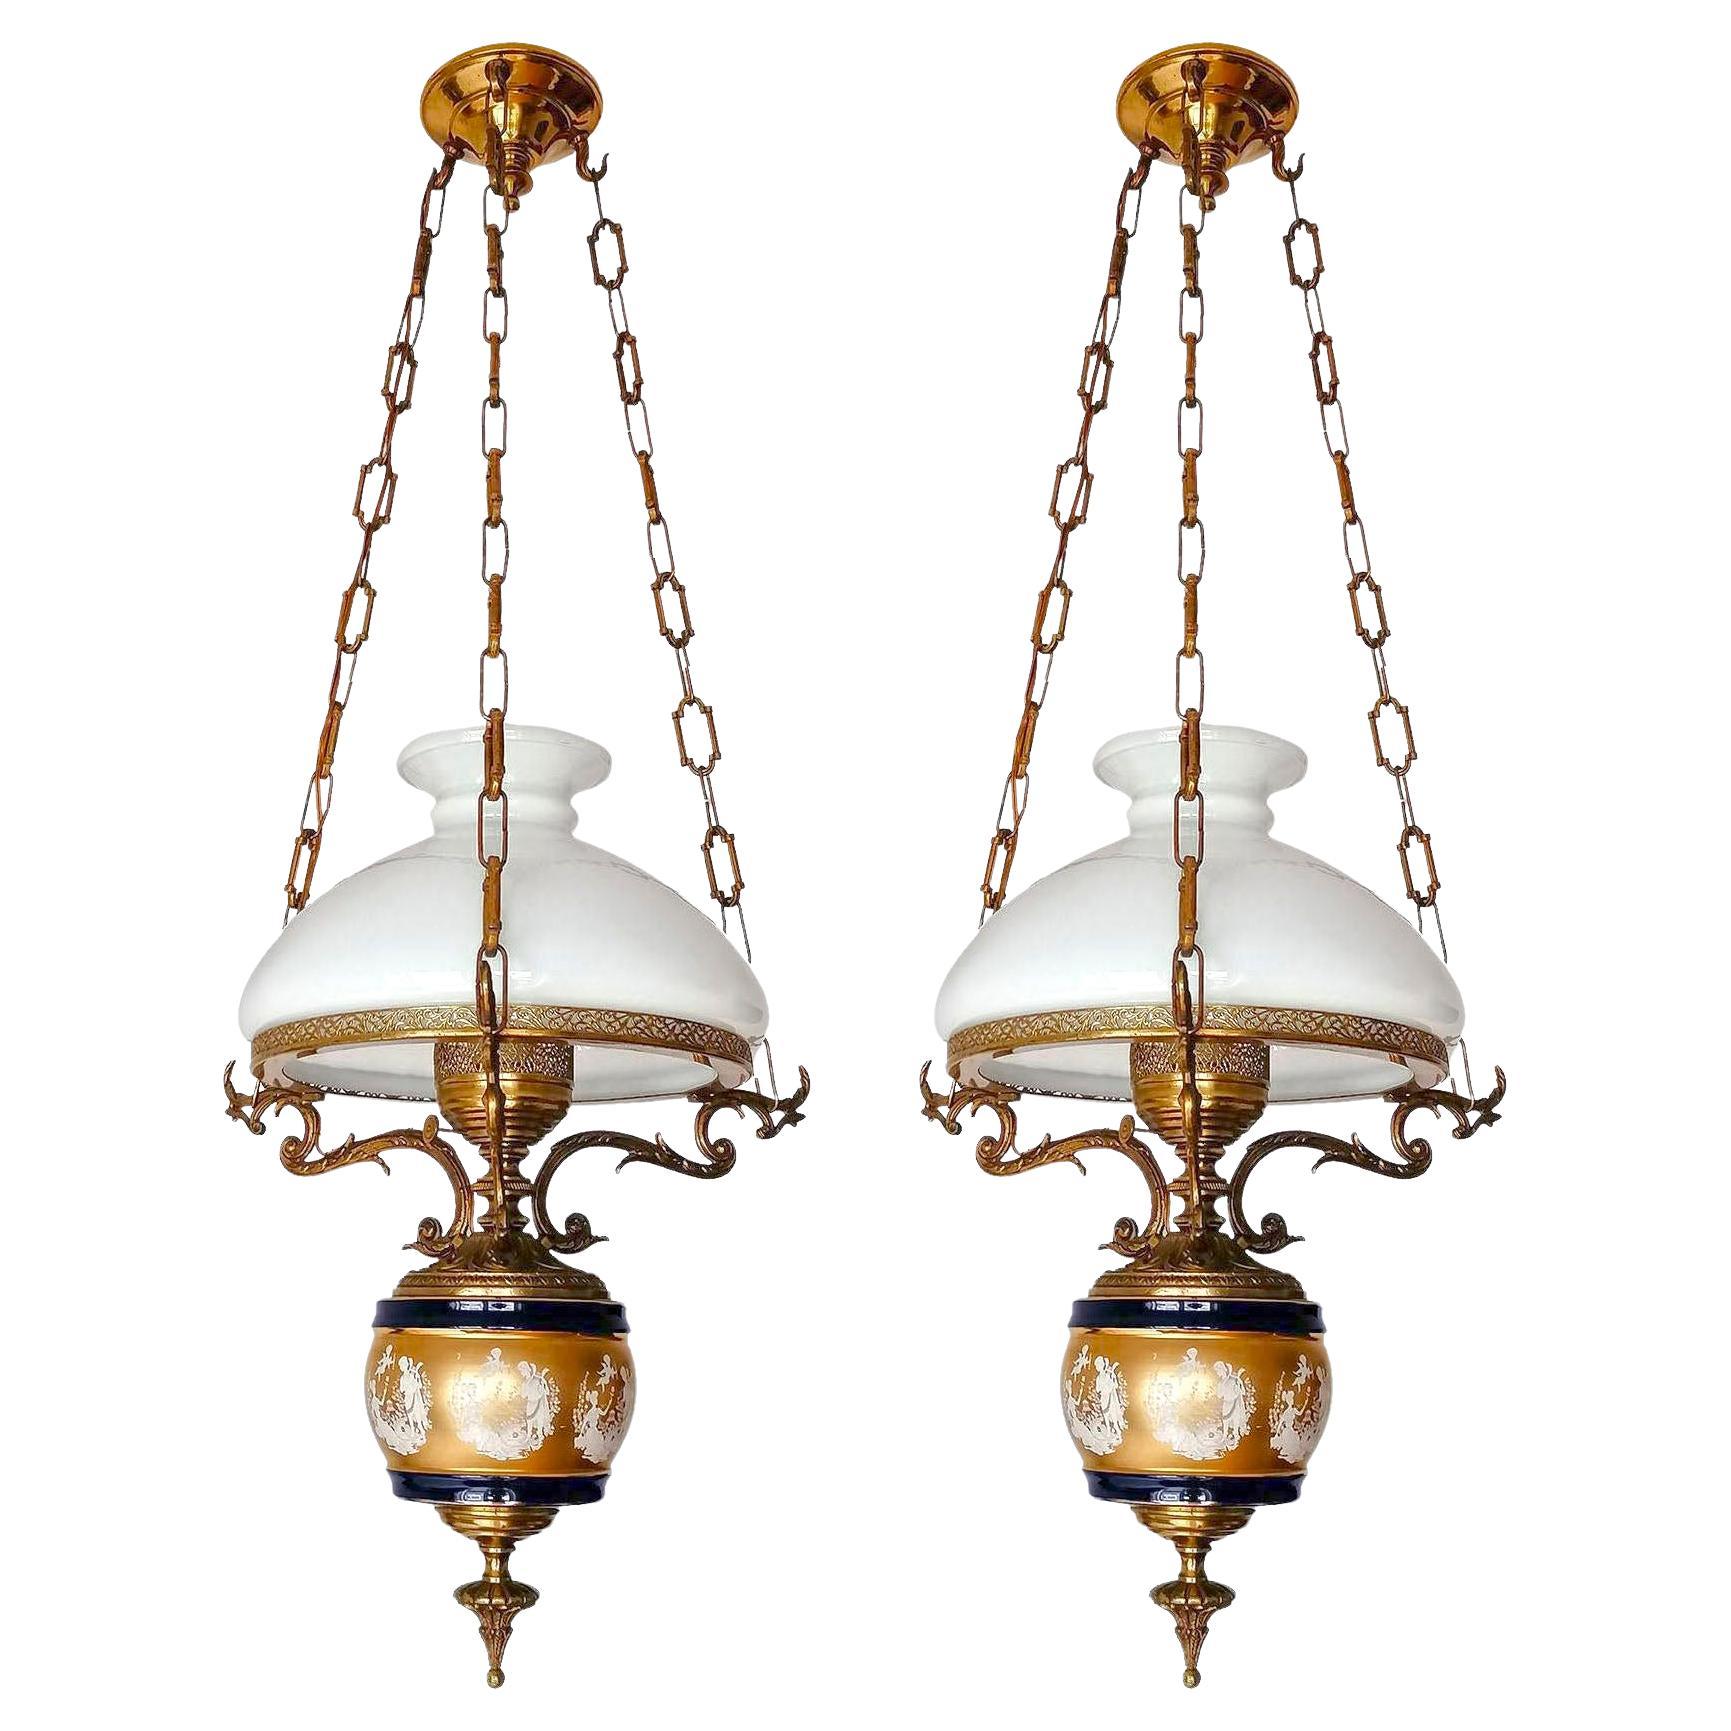 Gorgeous porcelain chandelier in gilt bronze Victorian library hanging oil lamp
and opaline glass shade. Also have a large matching chandelier. Price per unit. 

Materials: 
Opaline glass. 
Cobalt Blue & Gilt (Mate ad Bright Gold) porcelain 
Ornate